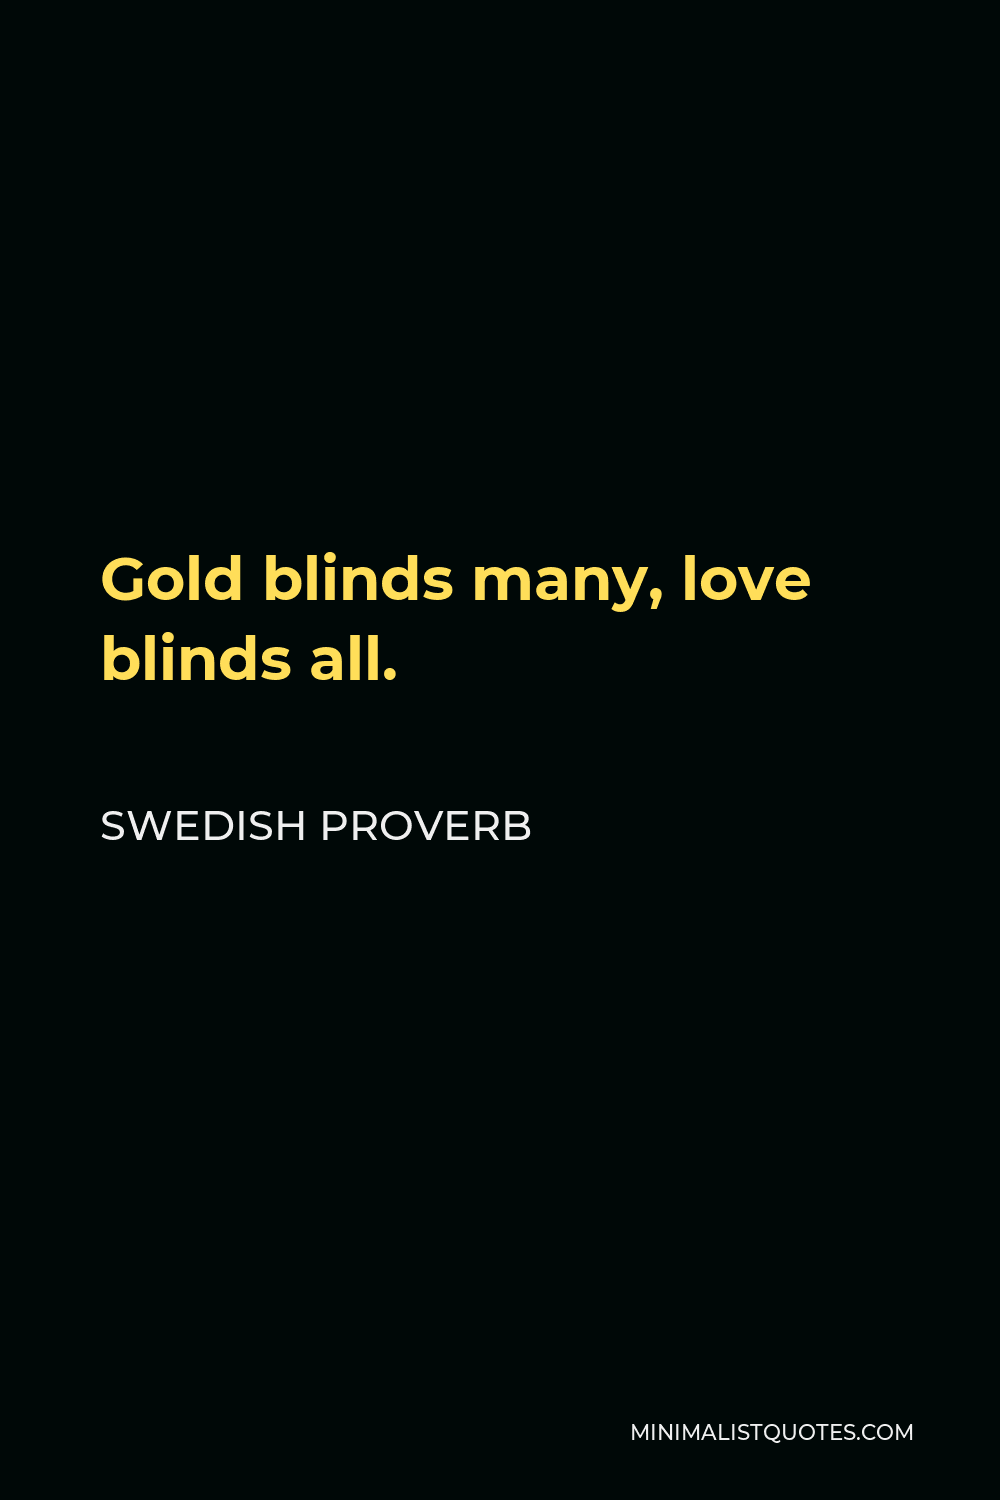 Swedish Proverb Quote - Gold blinds many, love blinds all.